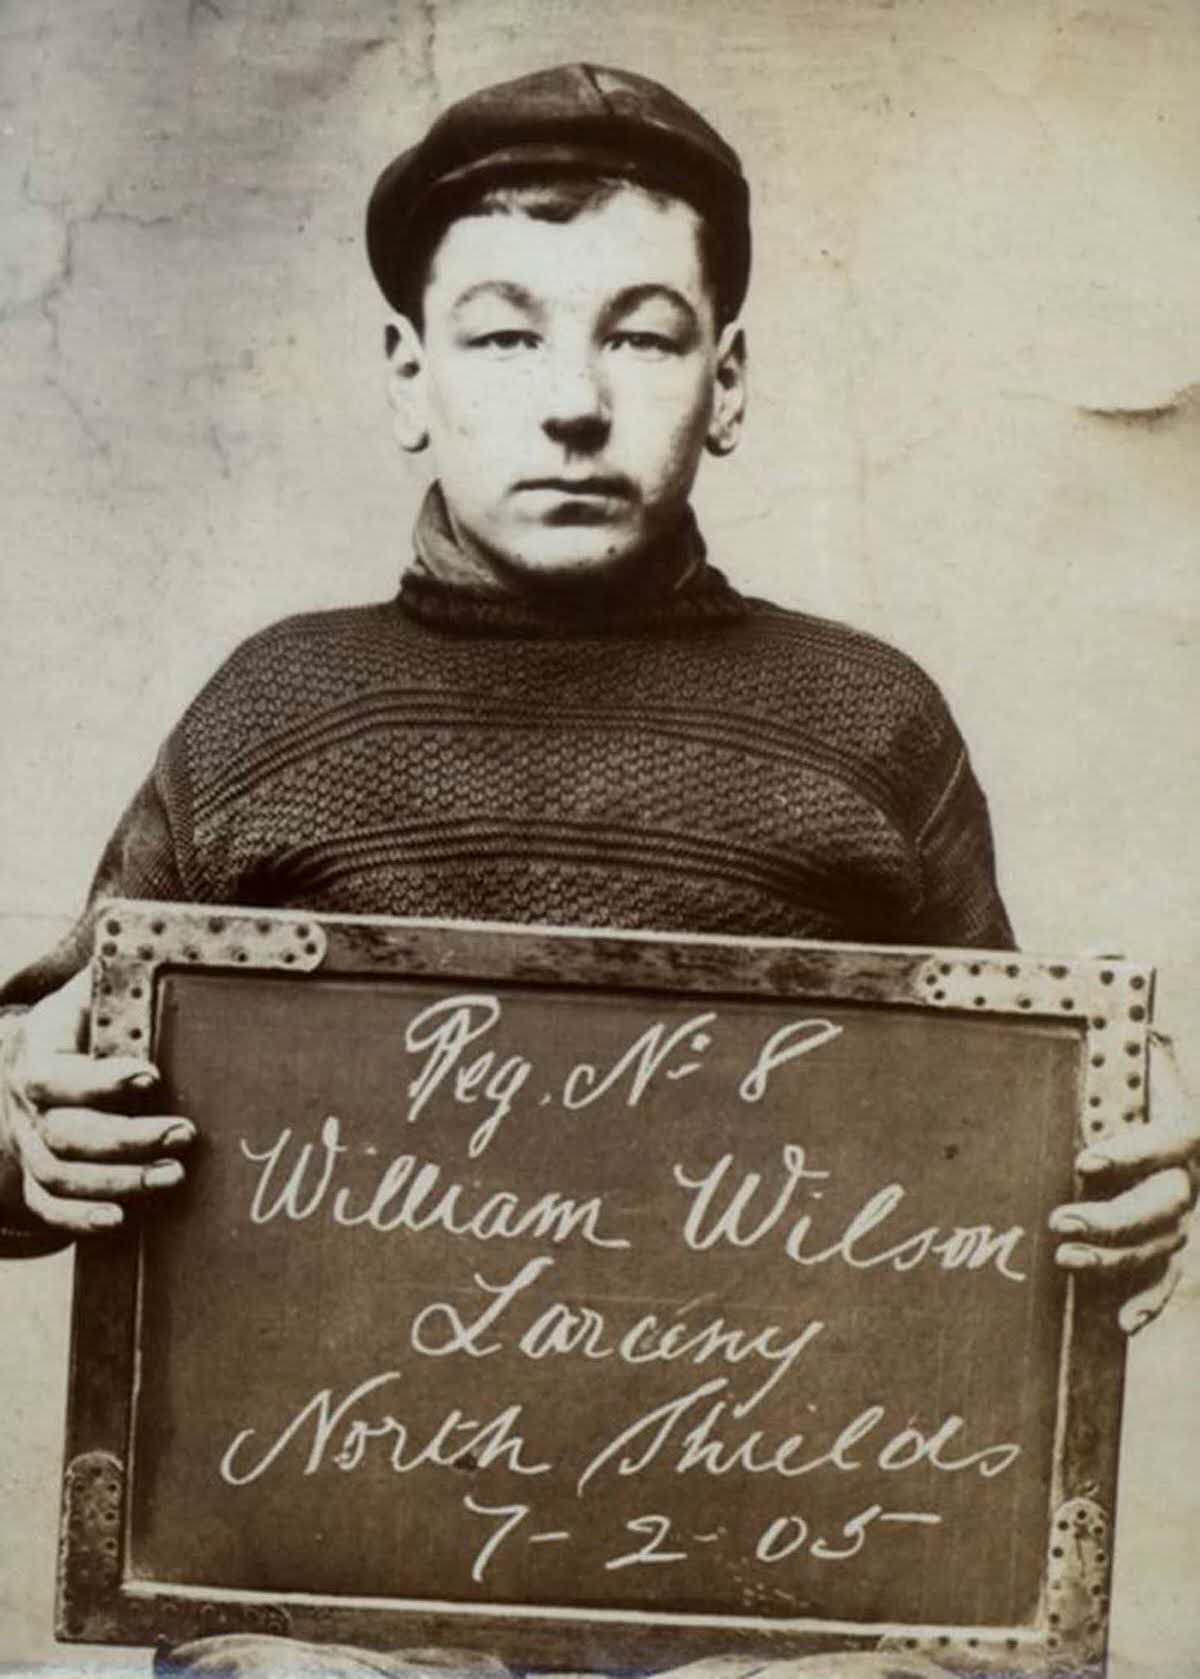 William Wilson, 16, arrested for stealing fish, 1905.